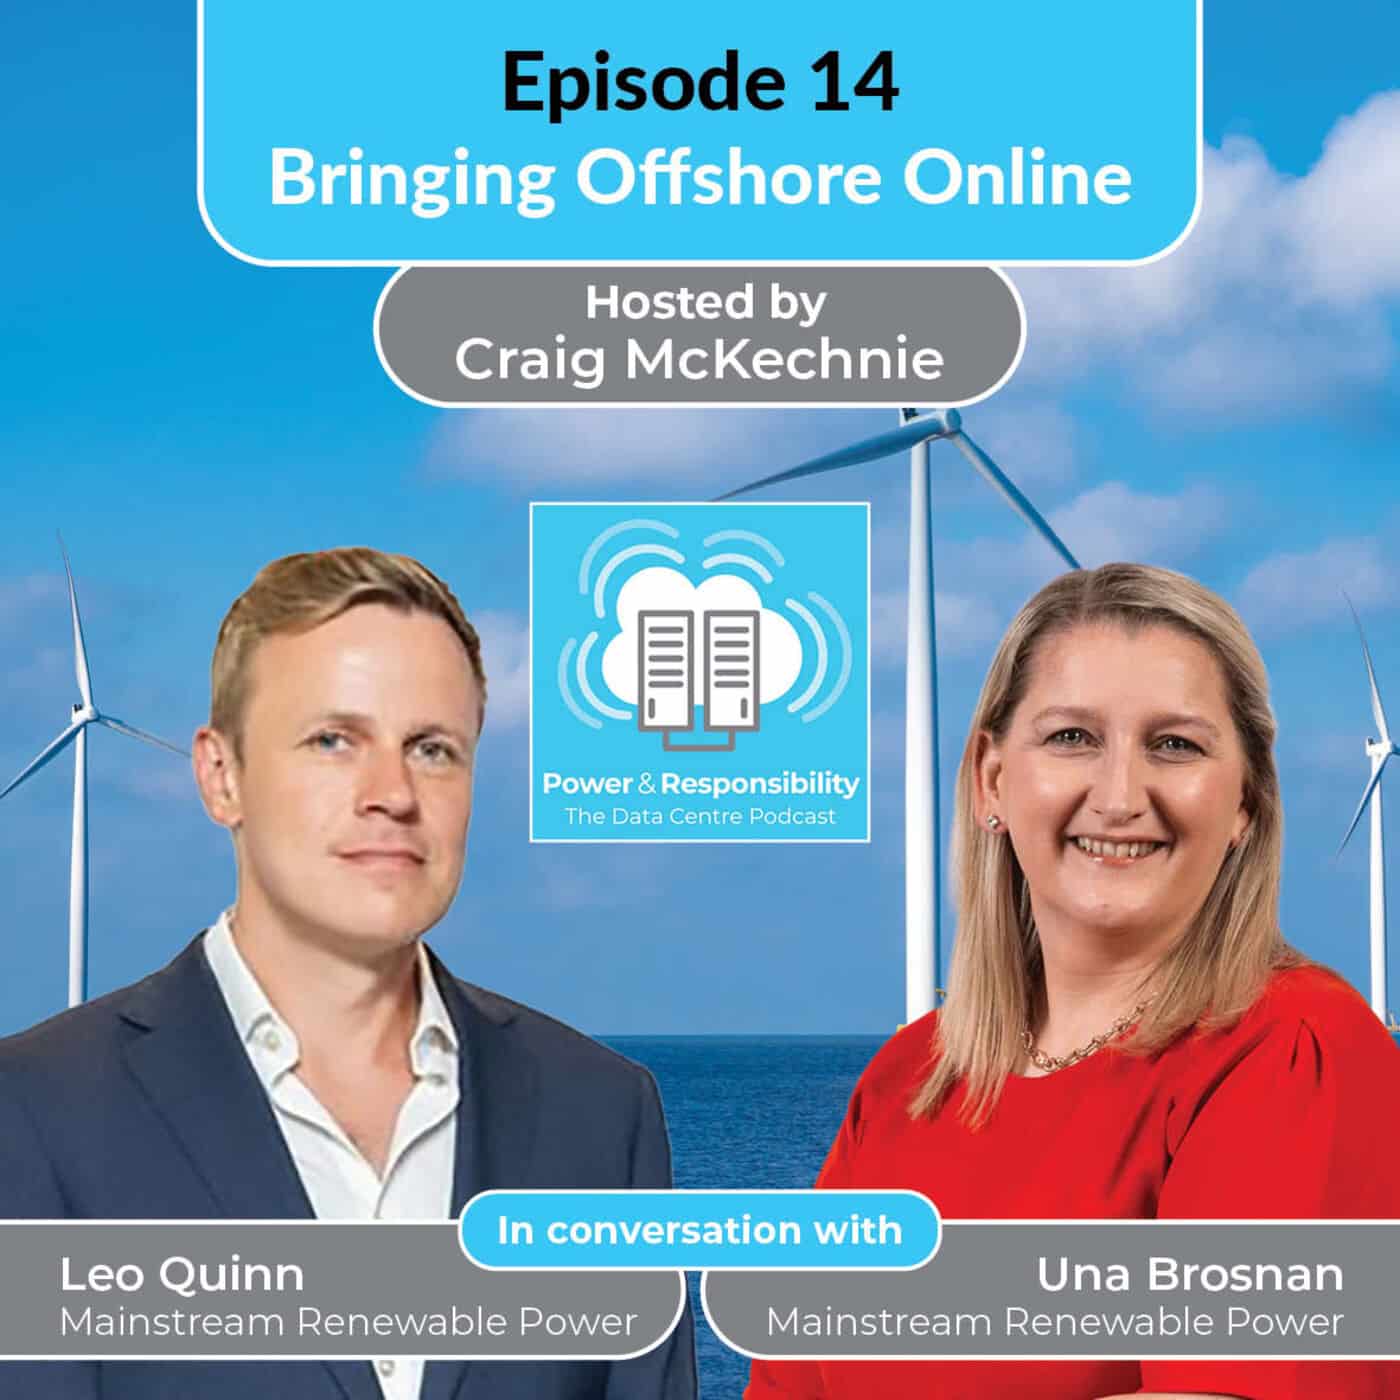 Power & Respsonsibility Podcast cover featuring Leo Quinn and una Brosnan